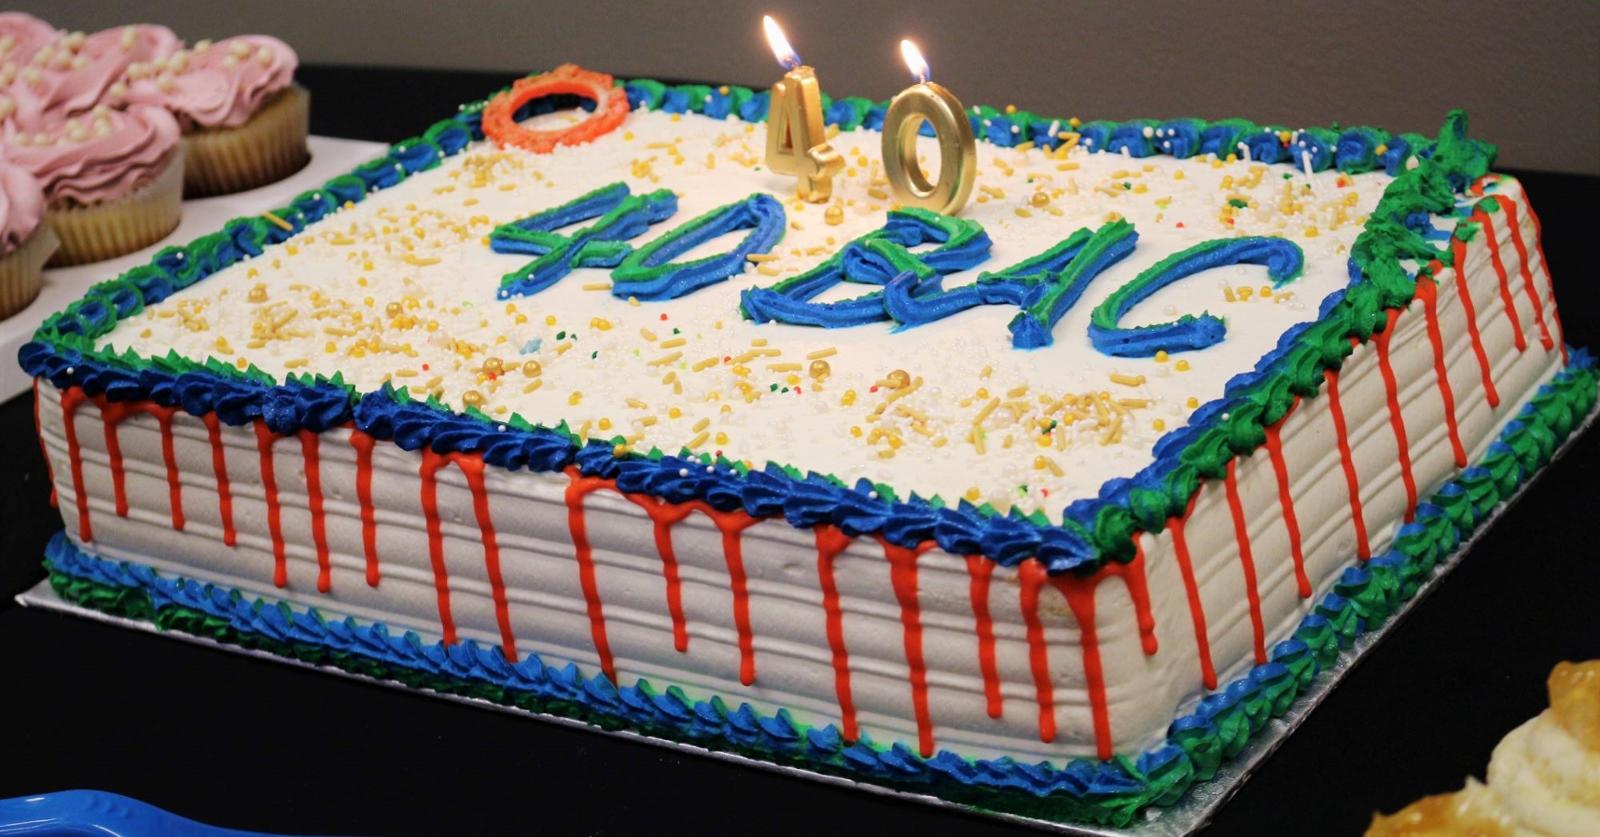 An image of a birthday cake